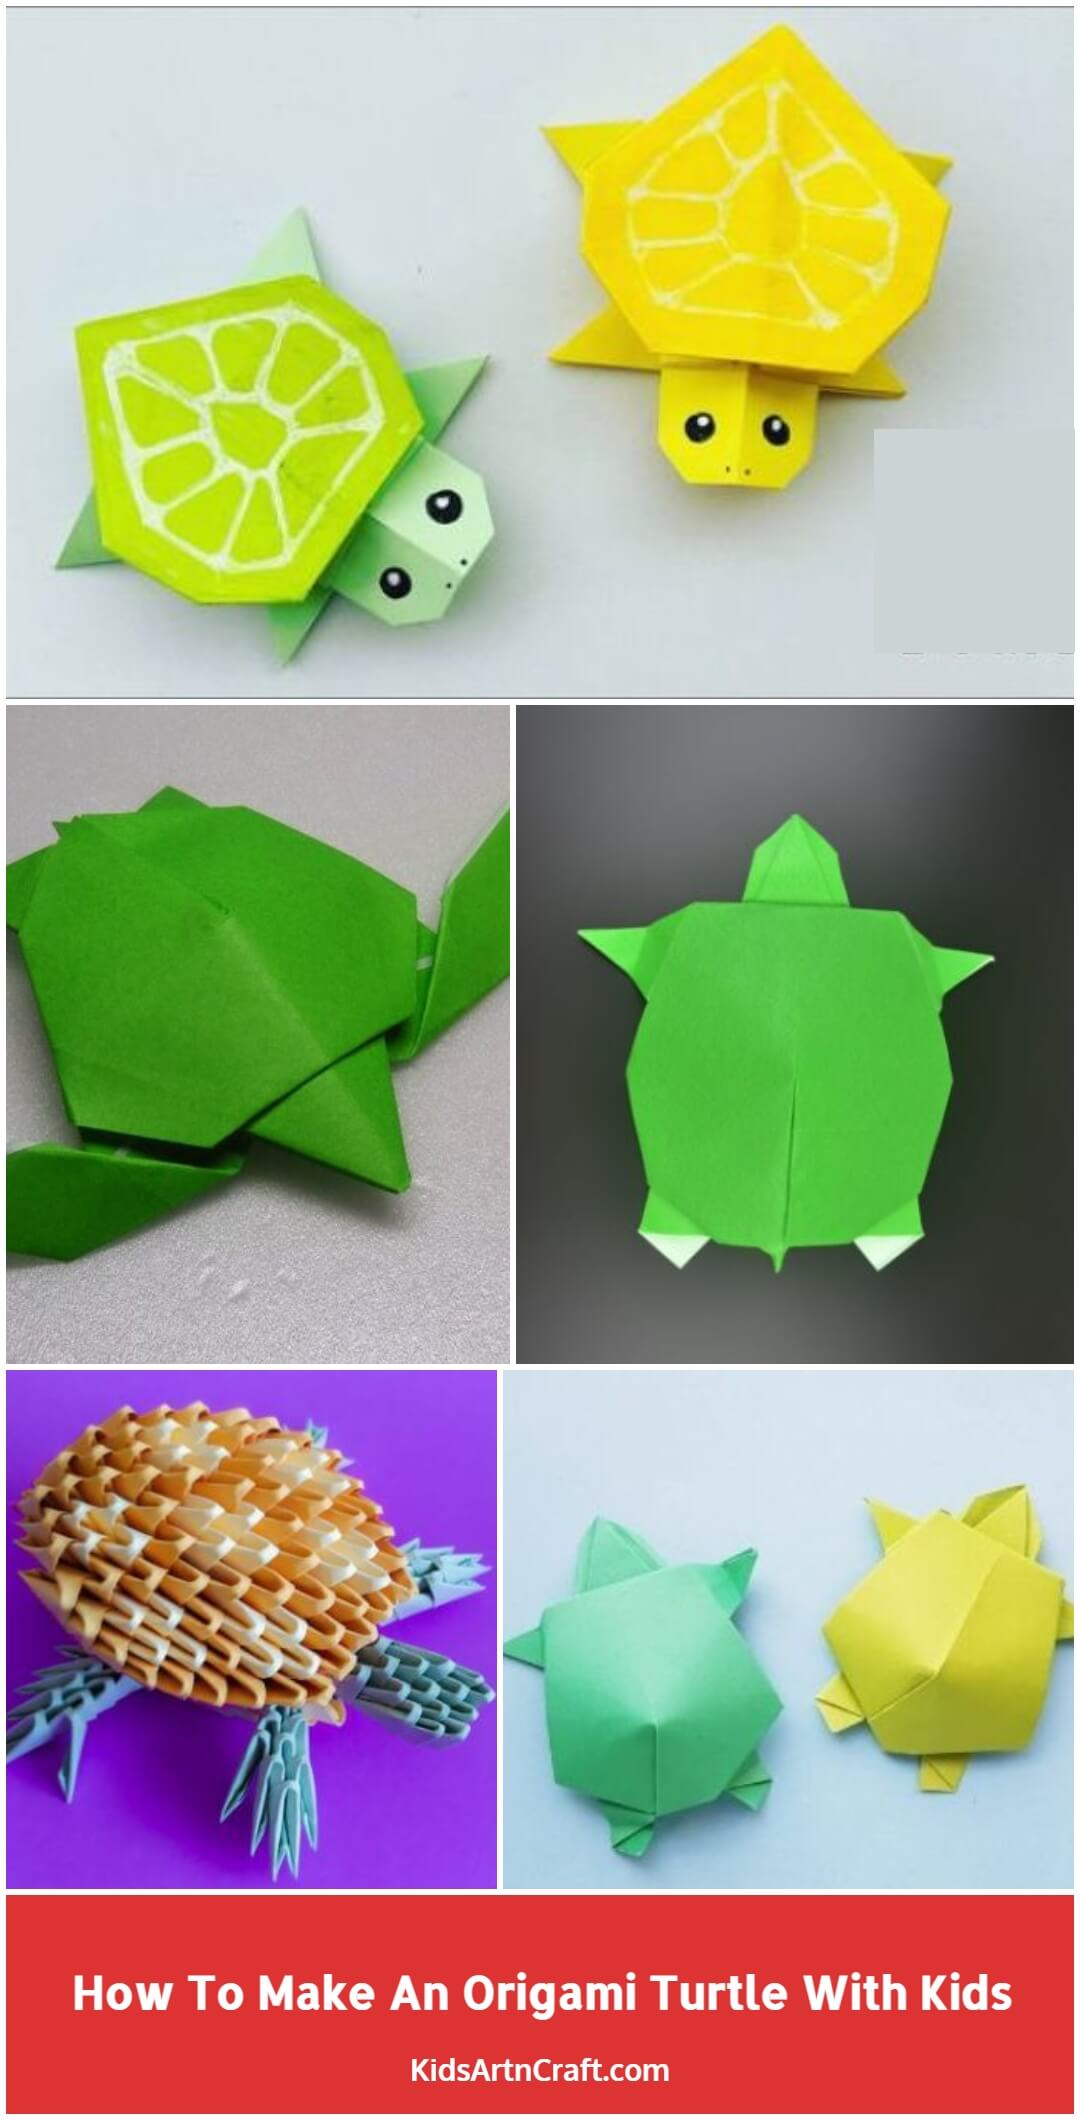 How To Make An Origami Turtle With Kids